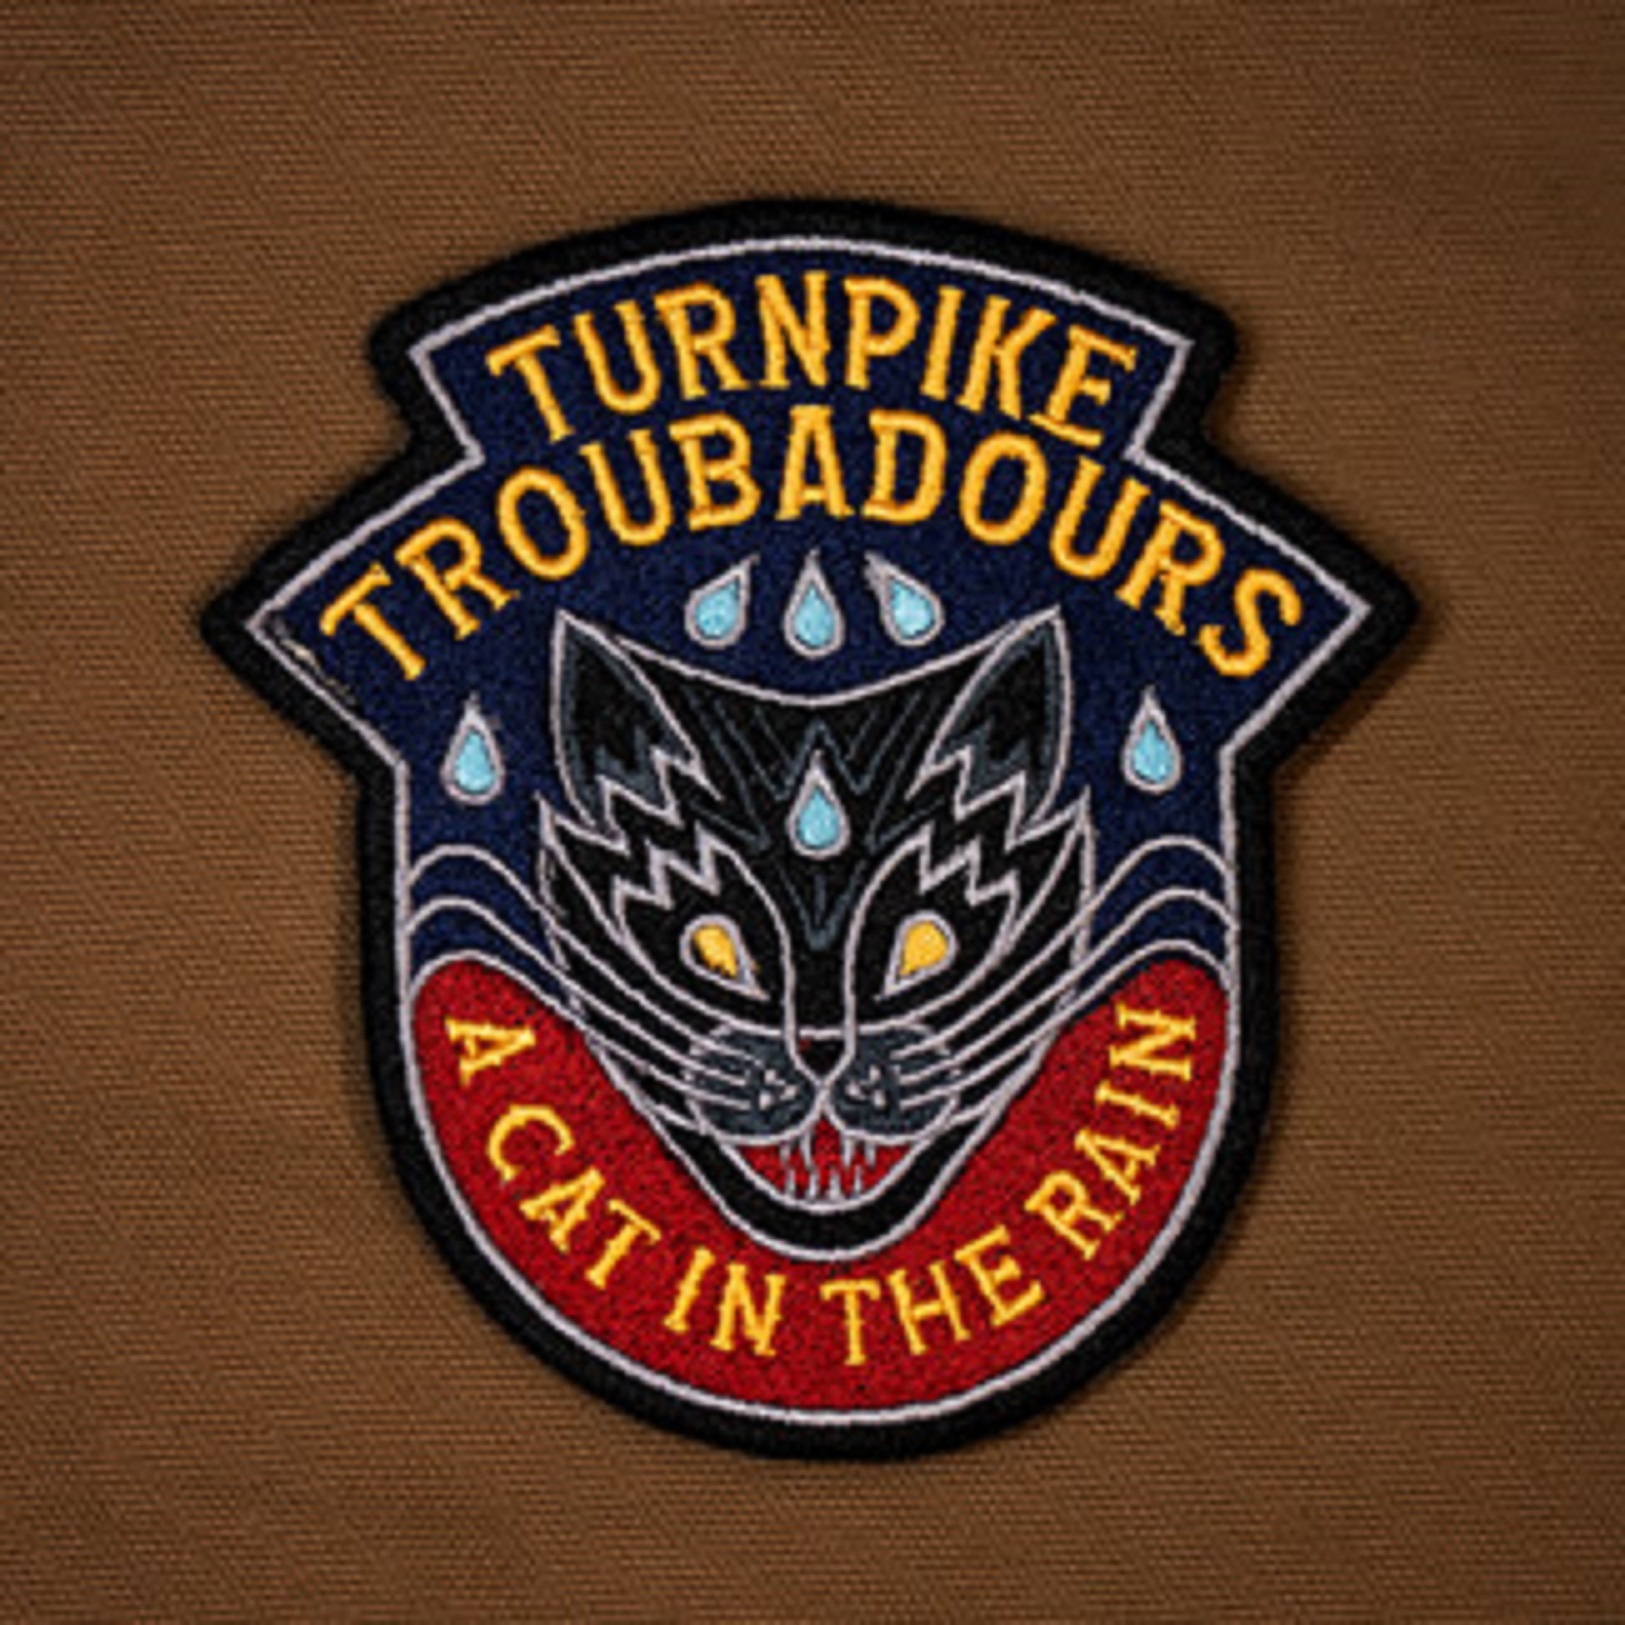 Turnpike Troubadours’ highly anticipated new album "A Cat in the Rain" out today